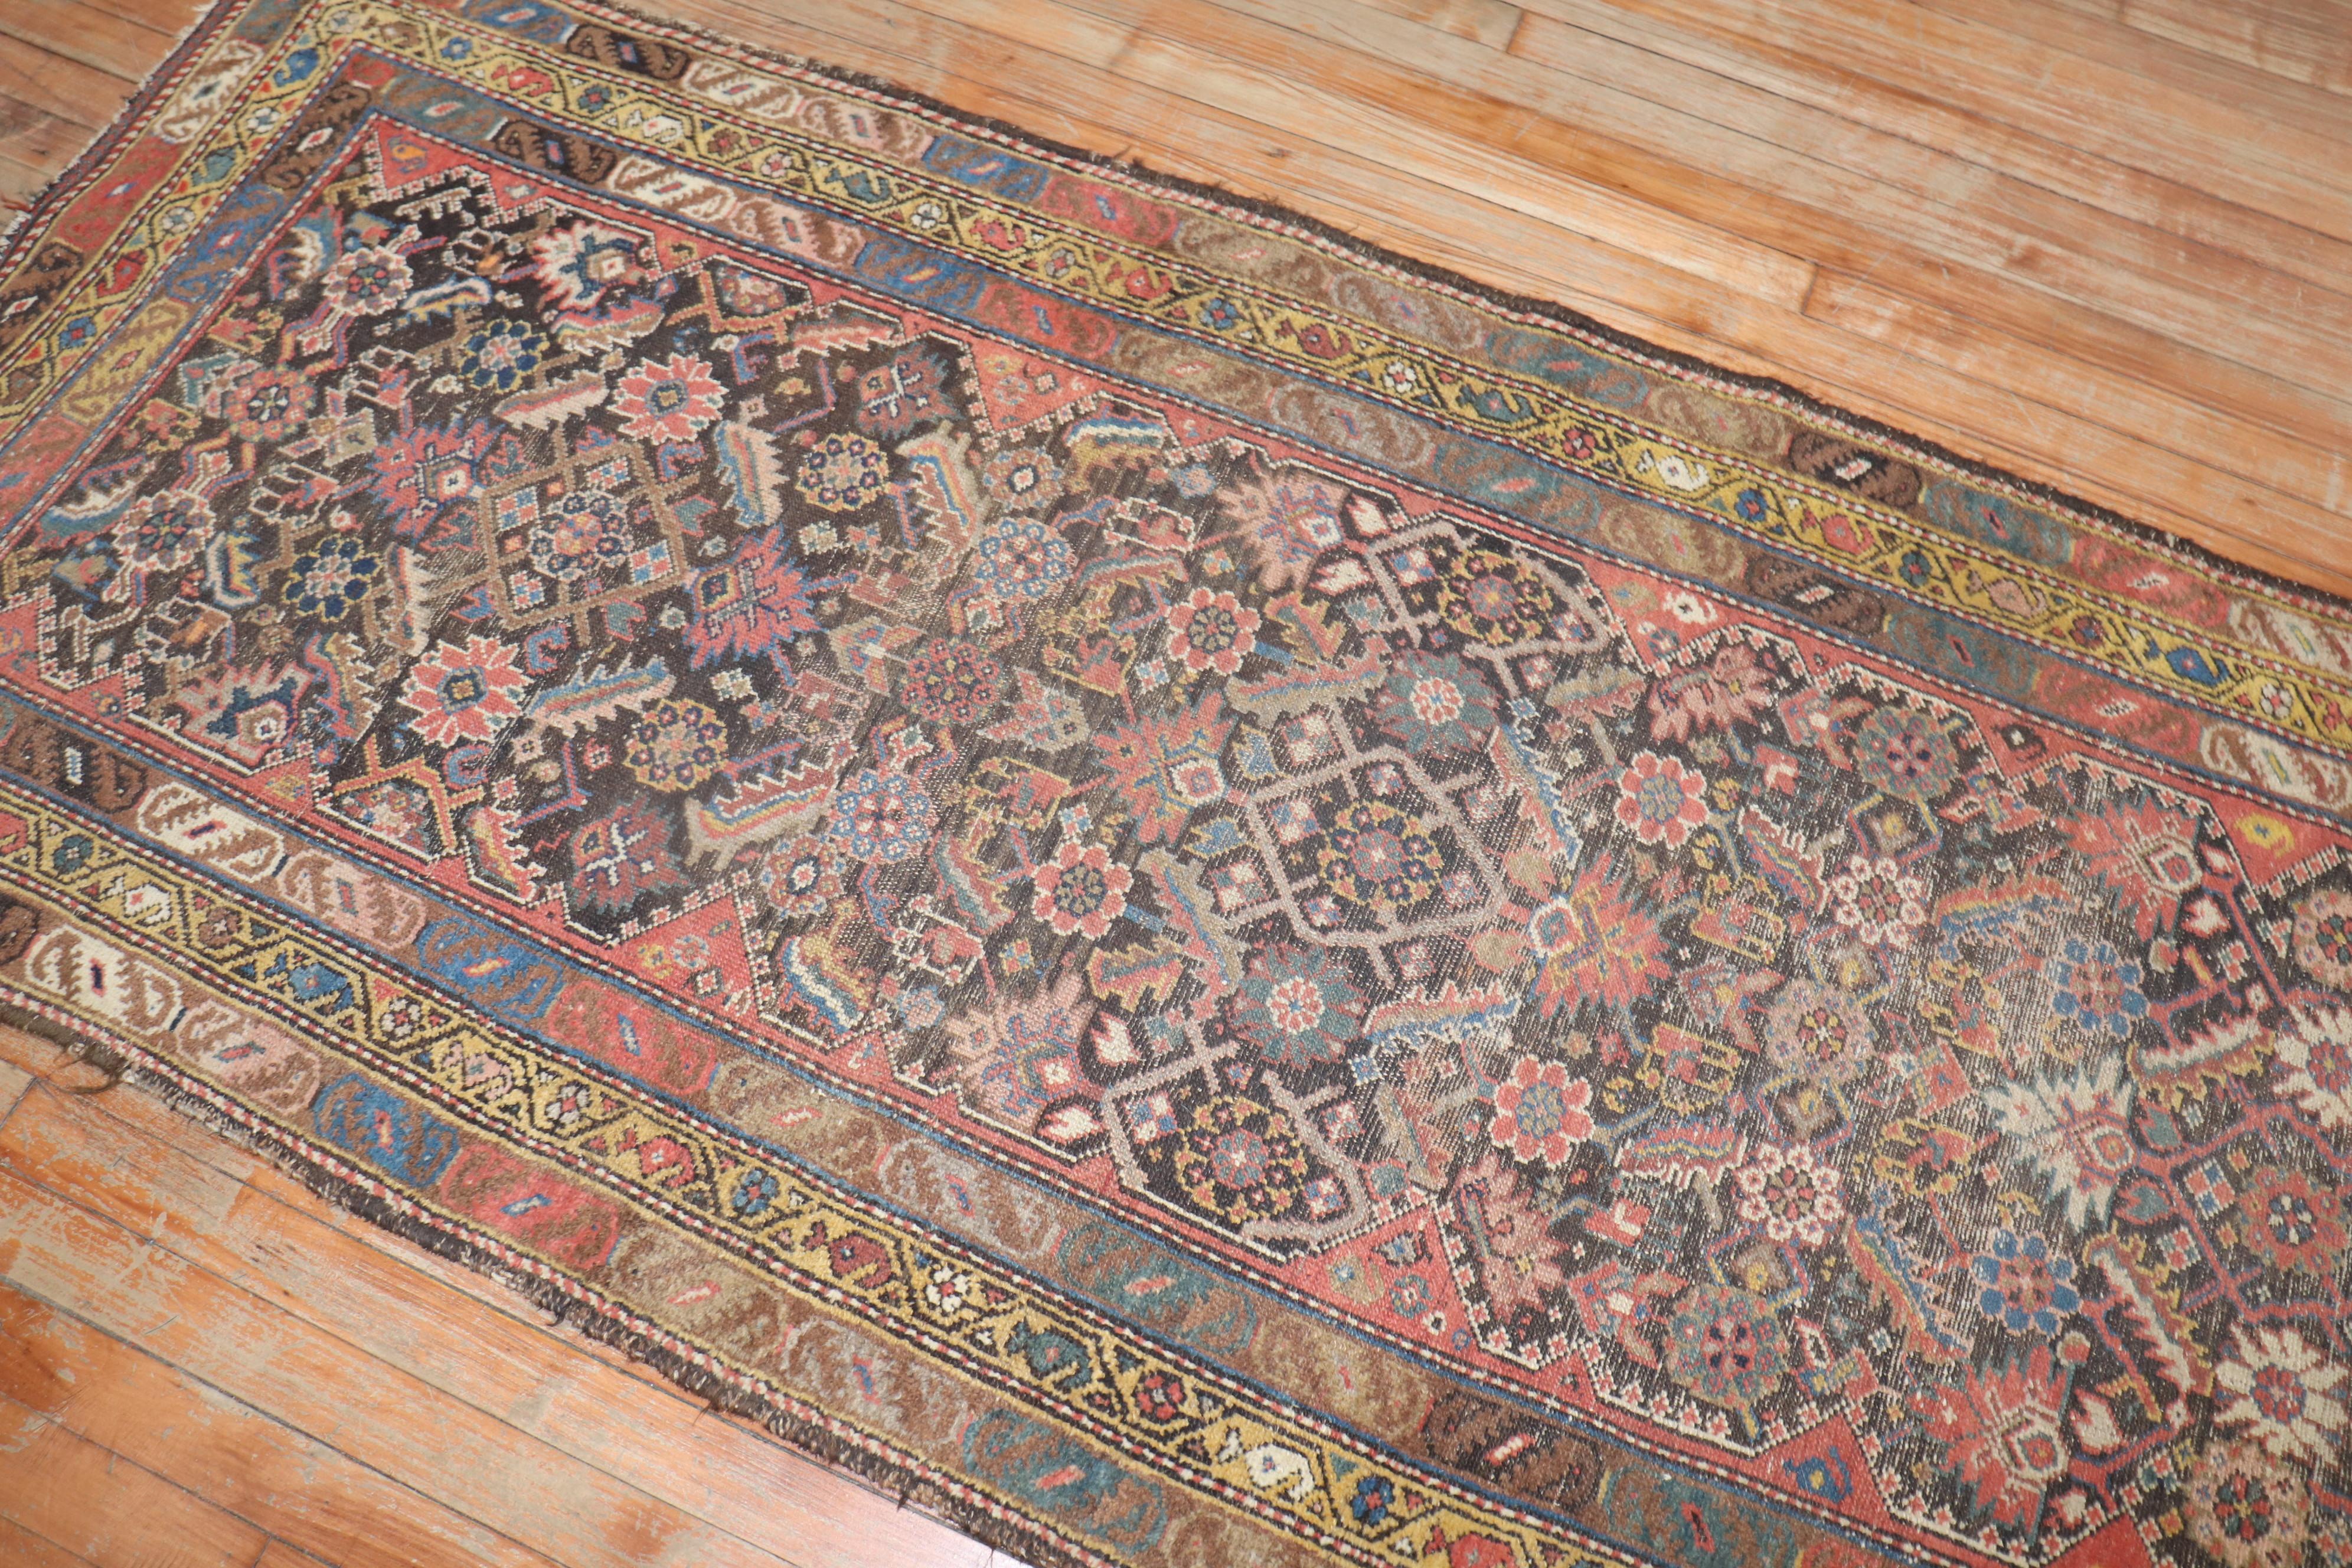 an early 20th -century Worn Persian Runner

Measure: 3'4'' x 8'7''.